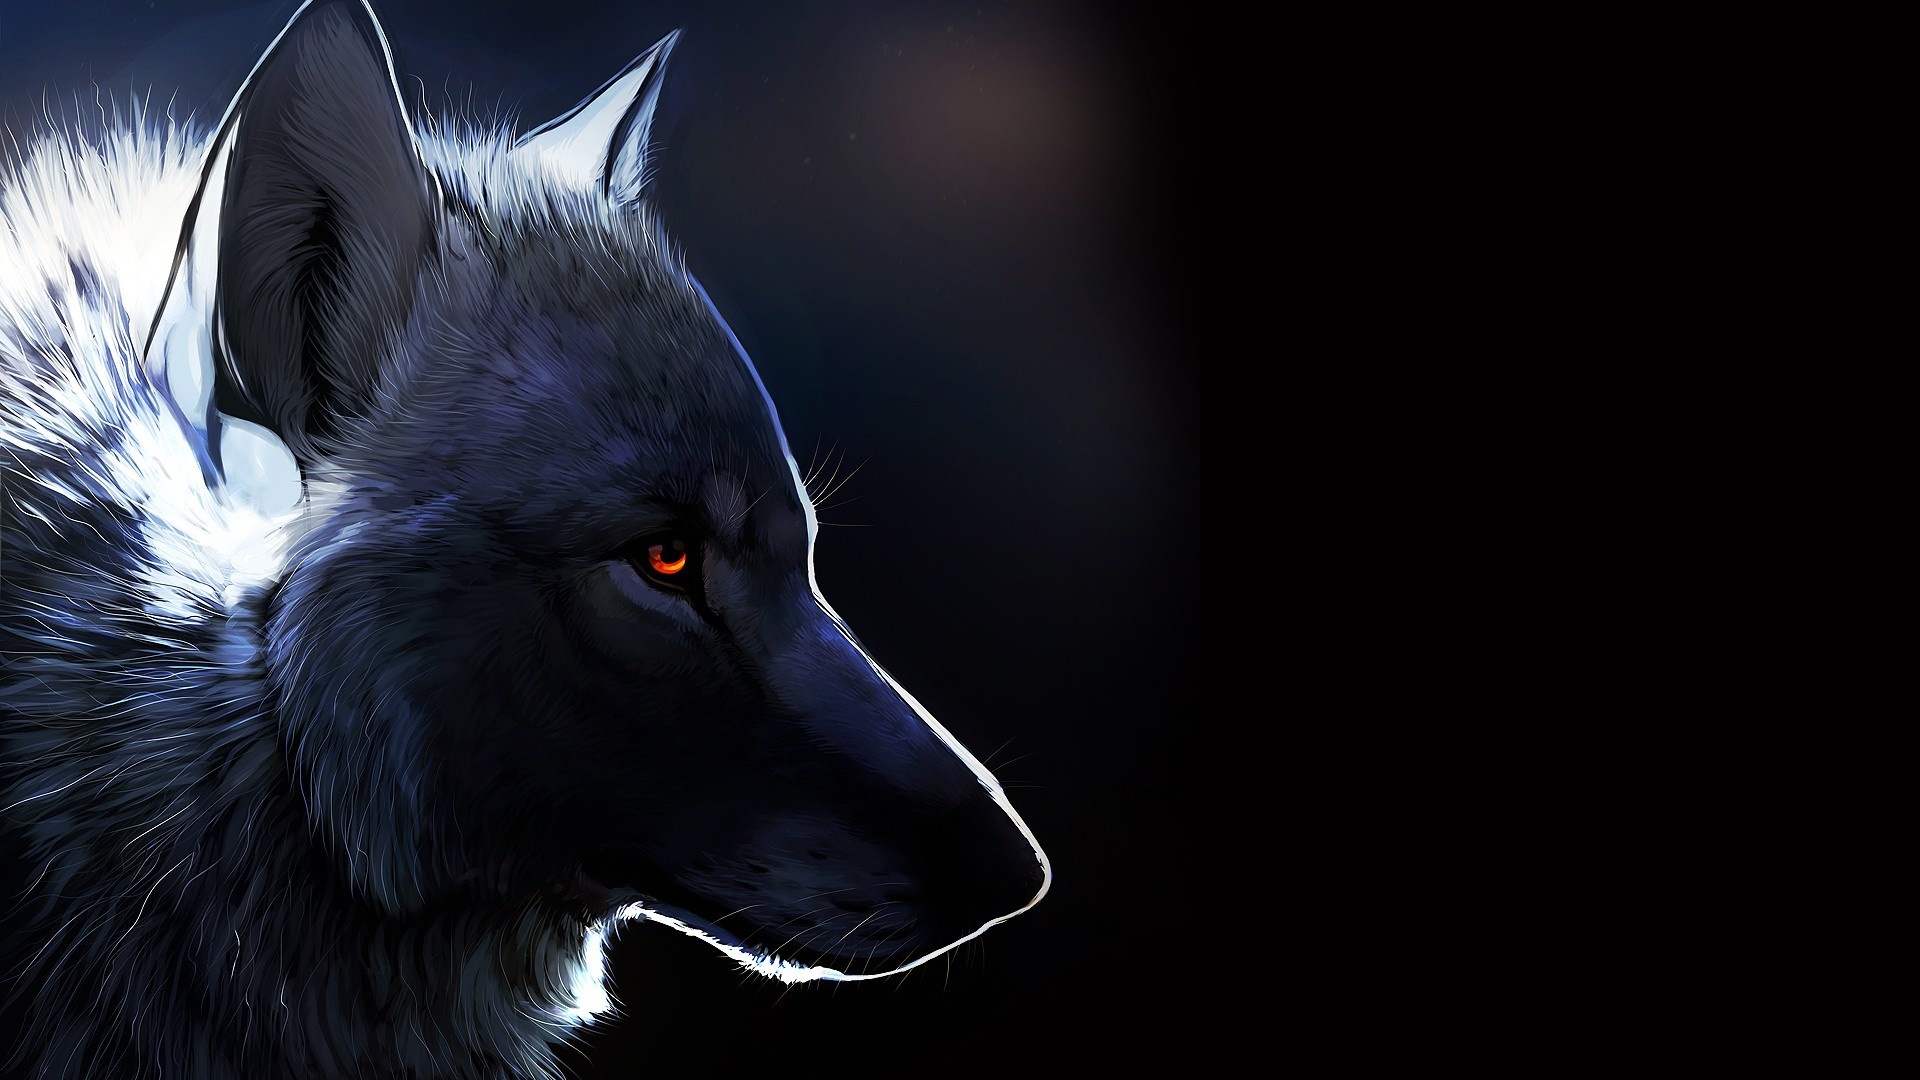 Wolf*316* (@wolfbane316)'s videos with I Am a Lone Wolf - Wolf | TikTok